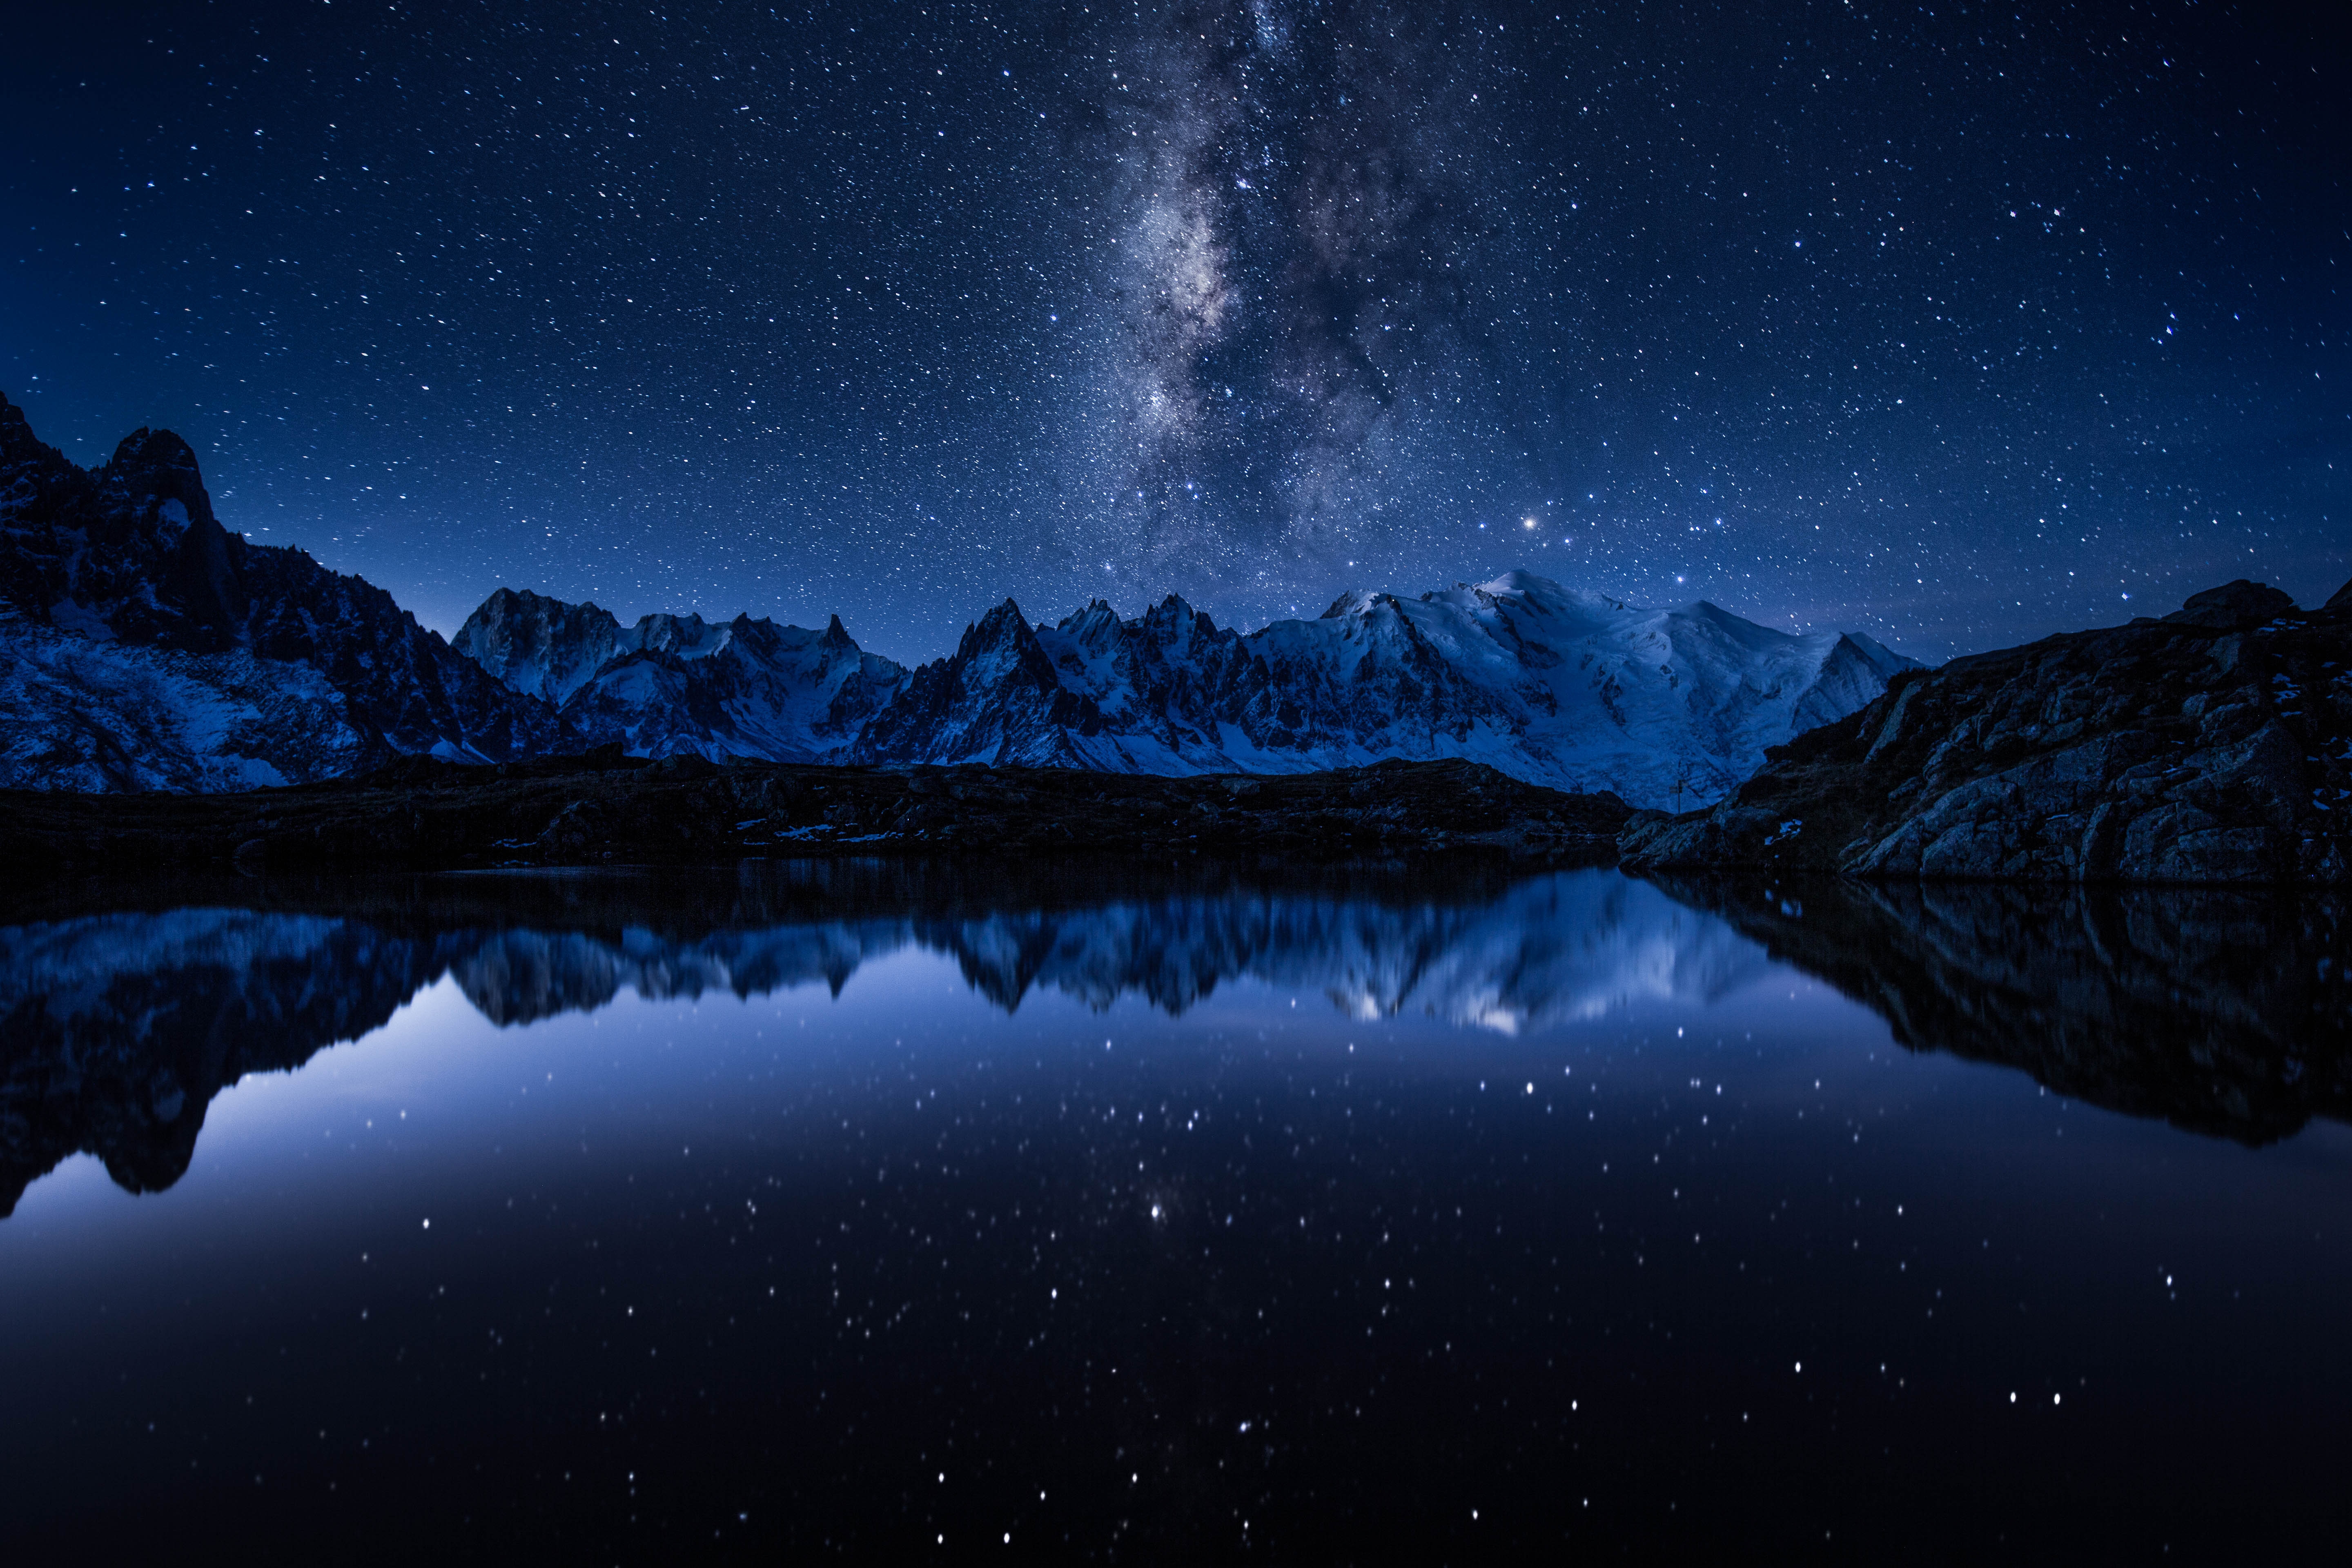 HD wallpaper, Reflection, Mountains, Night, 5K, Lake, Cold, Starry Sky, Milky Way